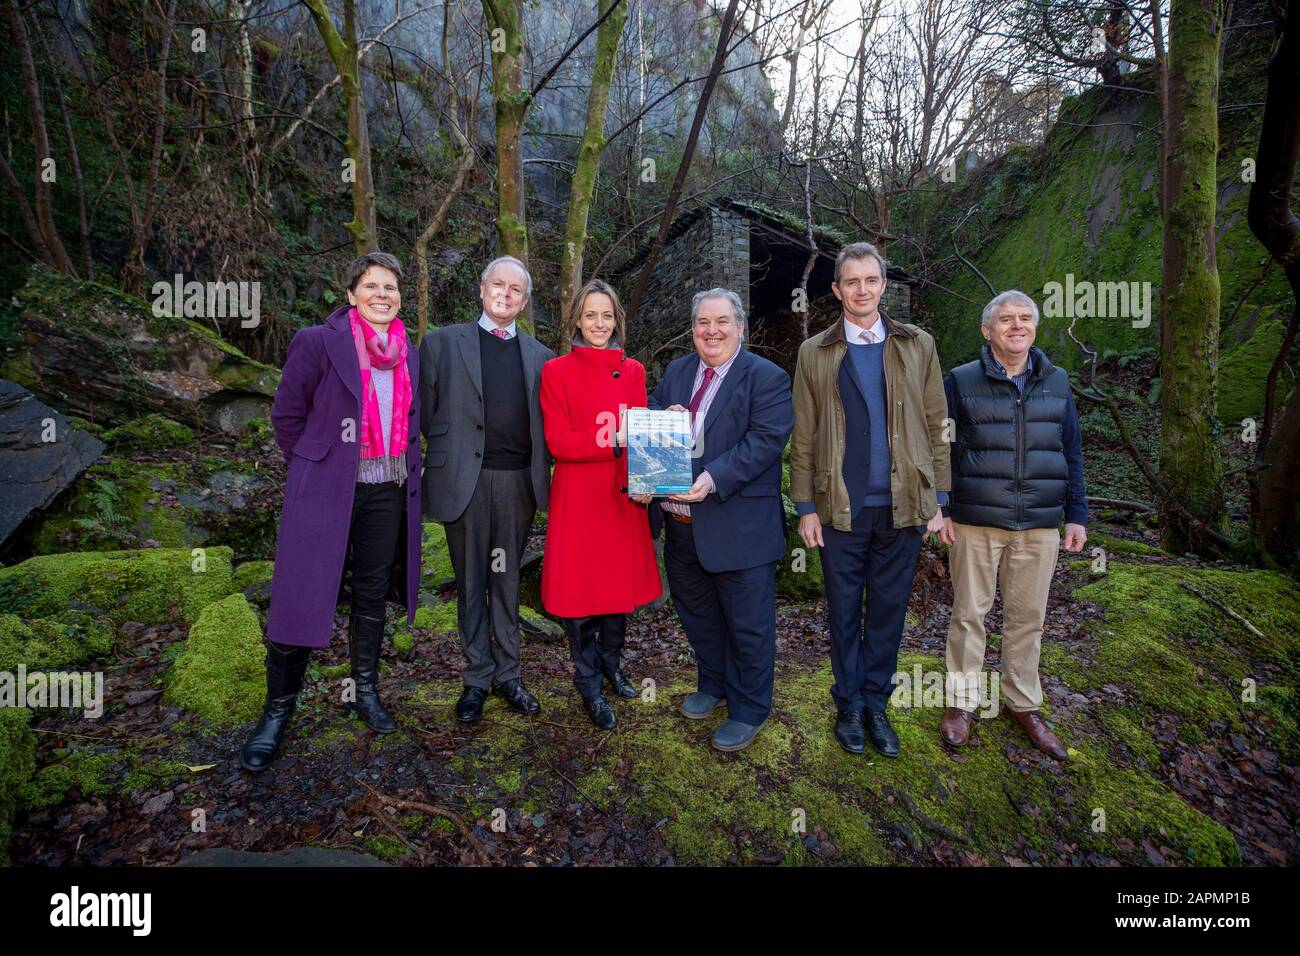 (Left to right) Dr Katheryn Roberts, Dr David Gwyn (historian), Heritage Minister Helen Whatley, Cllr Gareth Thomas, UK Welsh Minister David Davies and Slate Museum worker David Roberts at the Welsh Slate Museum in Llanberis, to mark the news that the slate mining landscape of northwest Wales could be the UK’s next UNESCO World Heritage site. Stock Photo